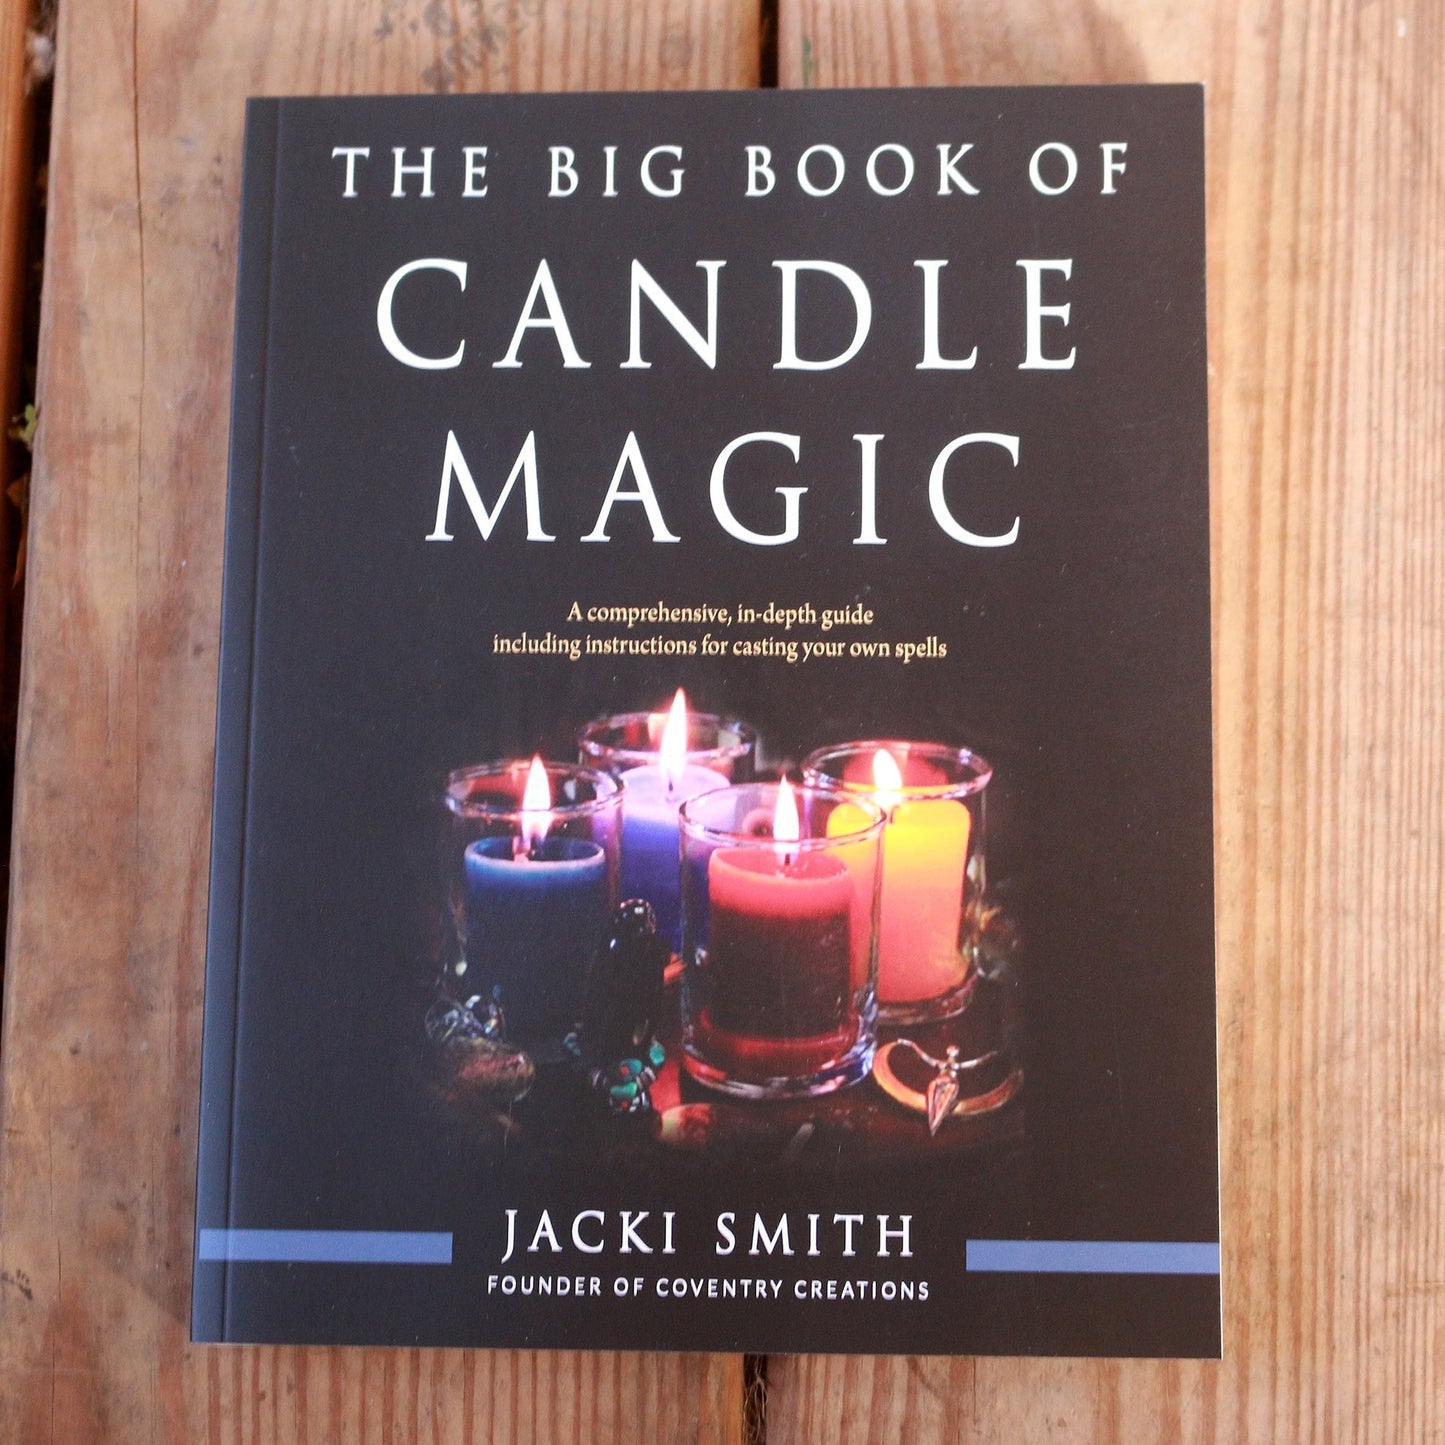 The Big Book of Candle Magic